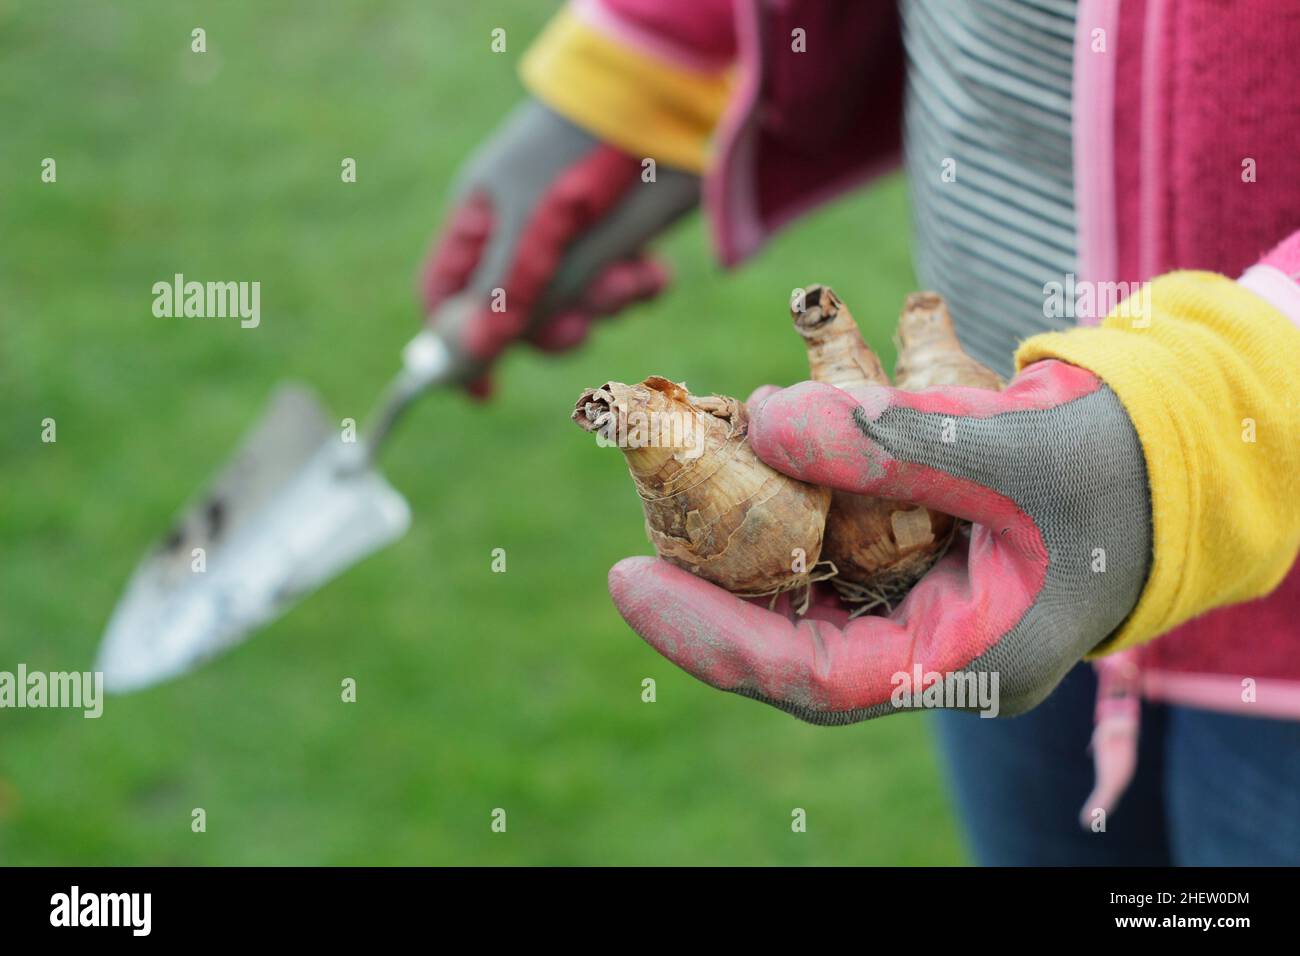 Narcissus. Woman preparing to plant daffodil bulbs in her garden. UK Stock Photo